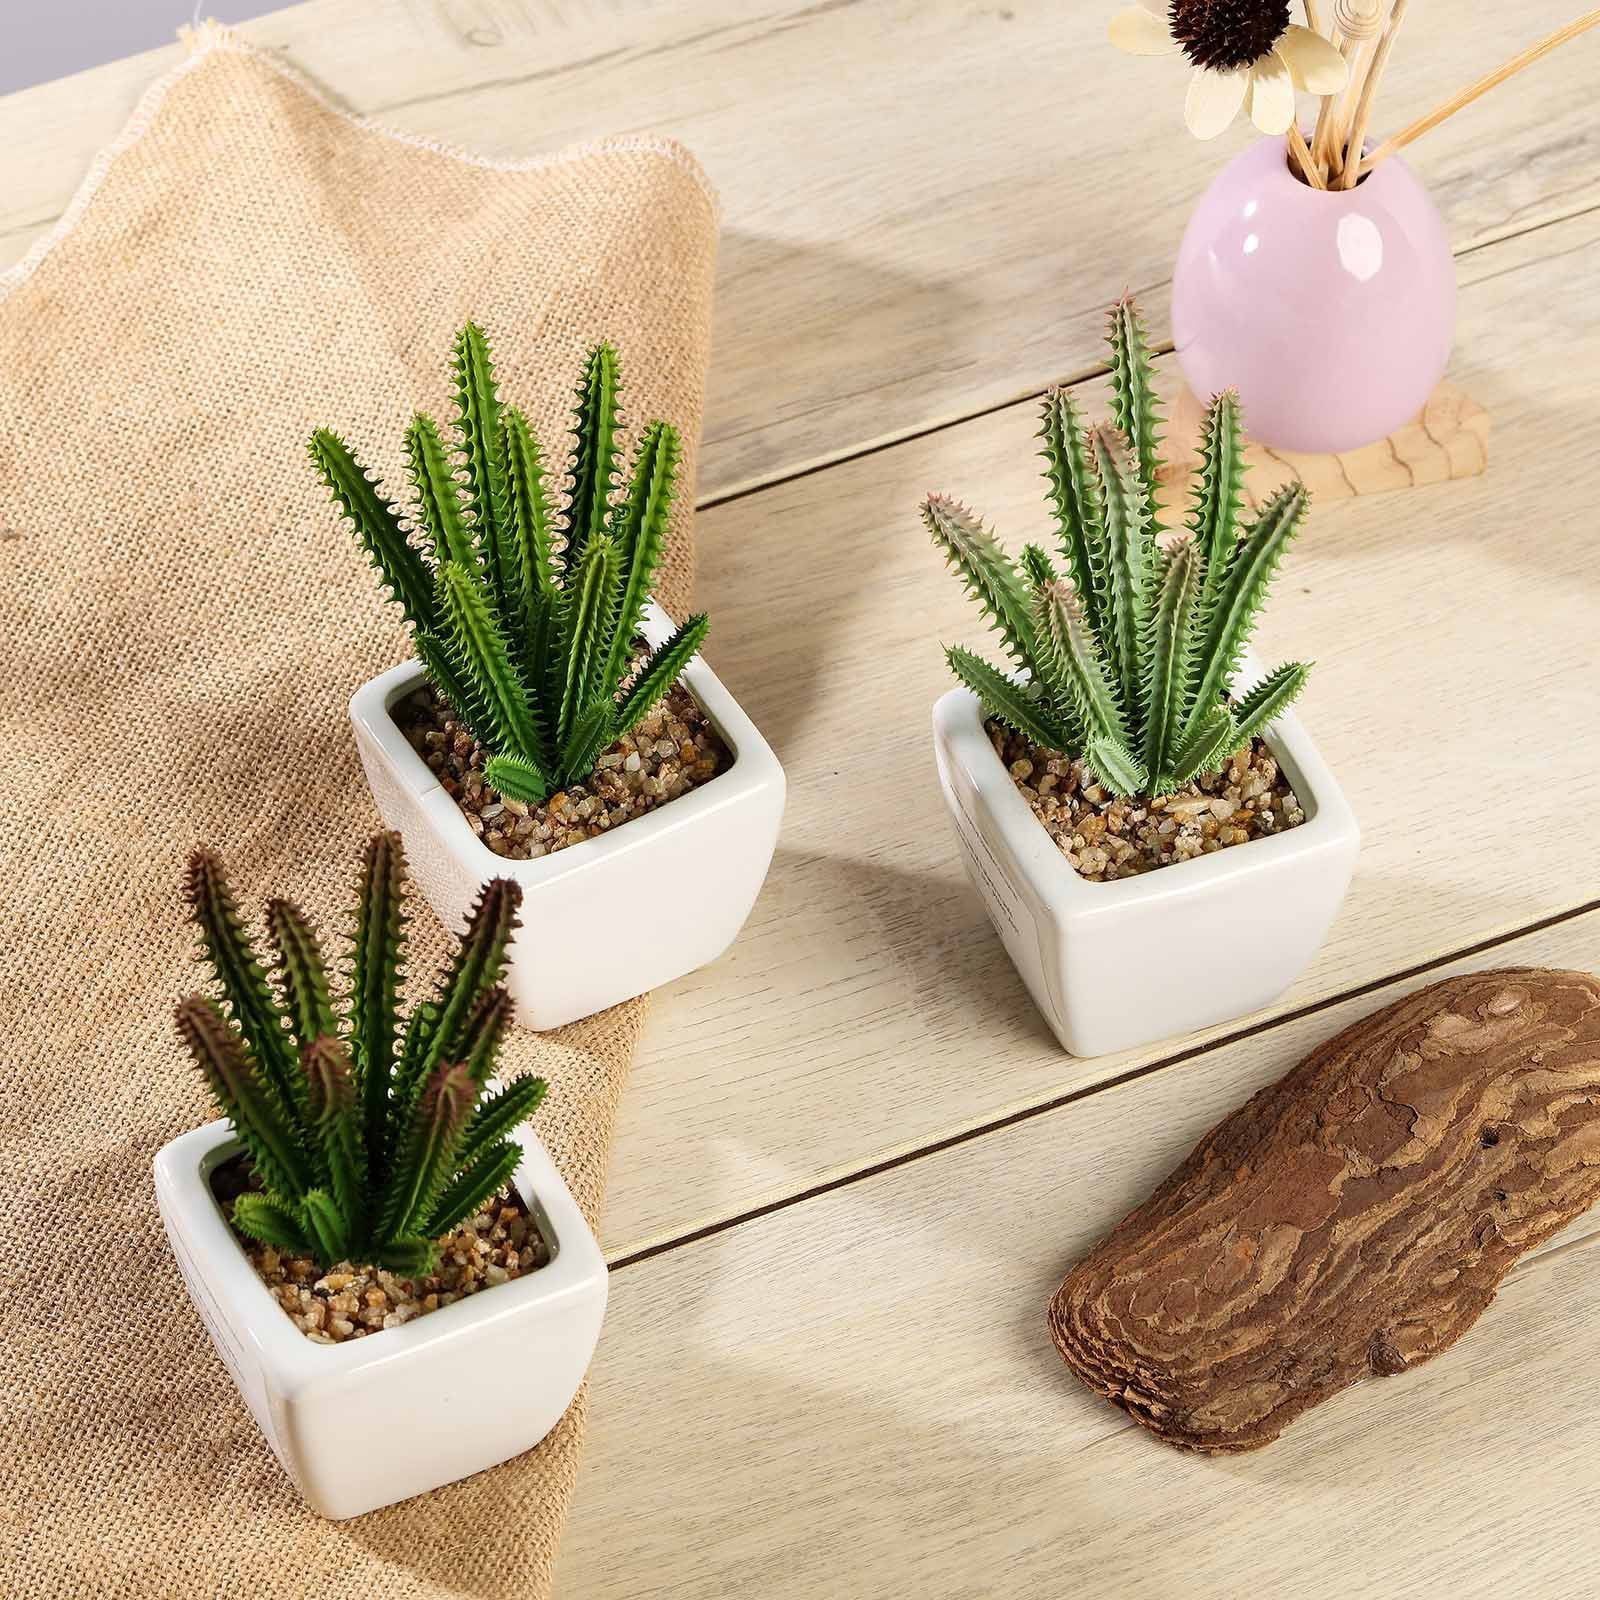 Details about   3 5" Assorted Green Faux Succulent Cactus Plants with Off White Ceramic Pots 